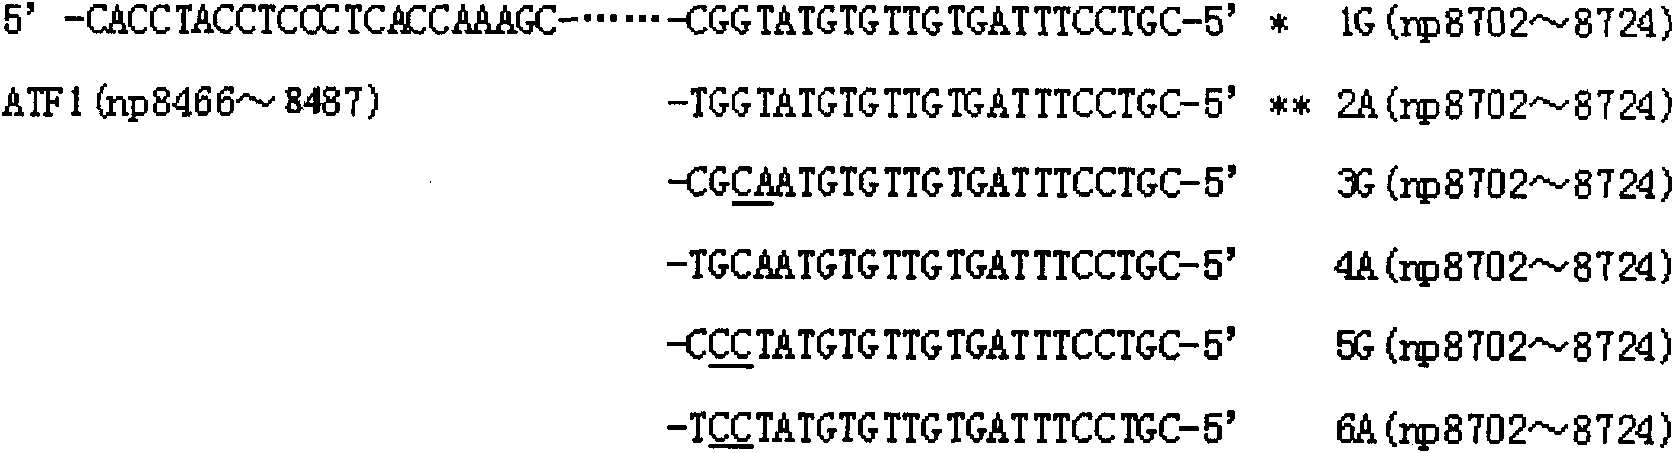 ARMS-PCR method for mtDNA allelic gene typing and point mutation detecting